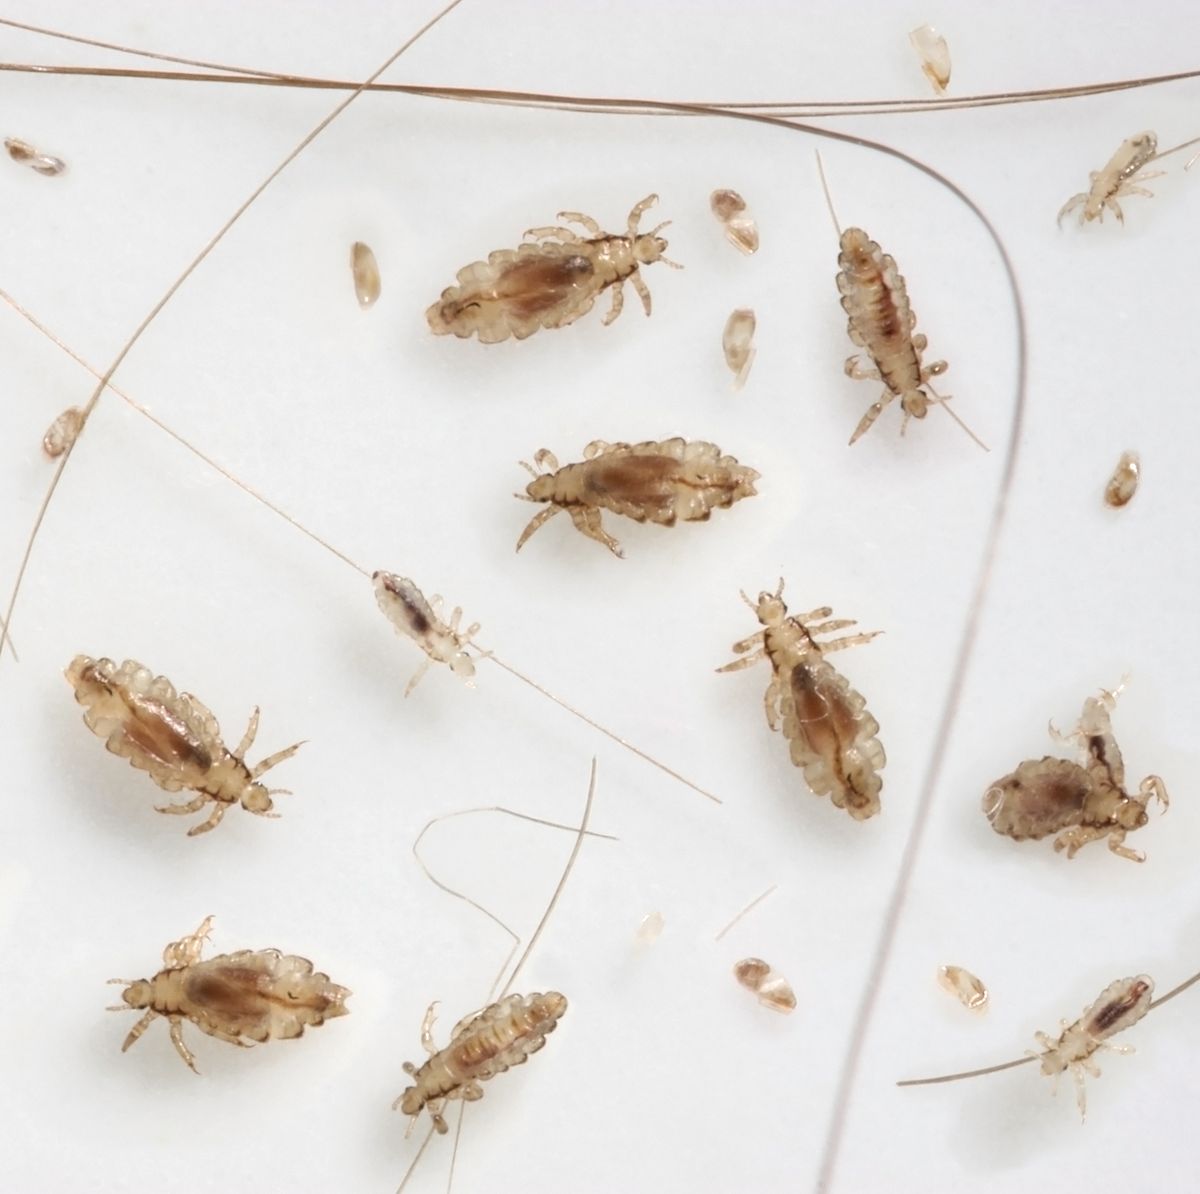 How to Get Rid of Head Lice - Best Natural Head Lice Remedies